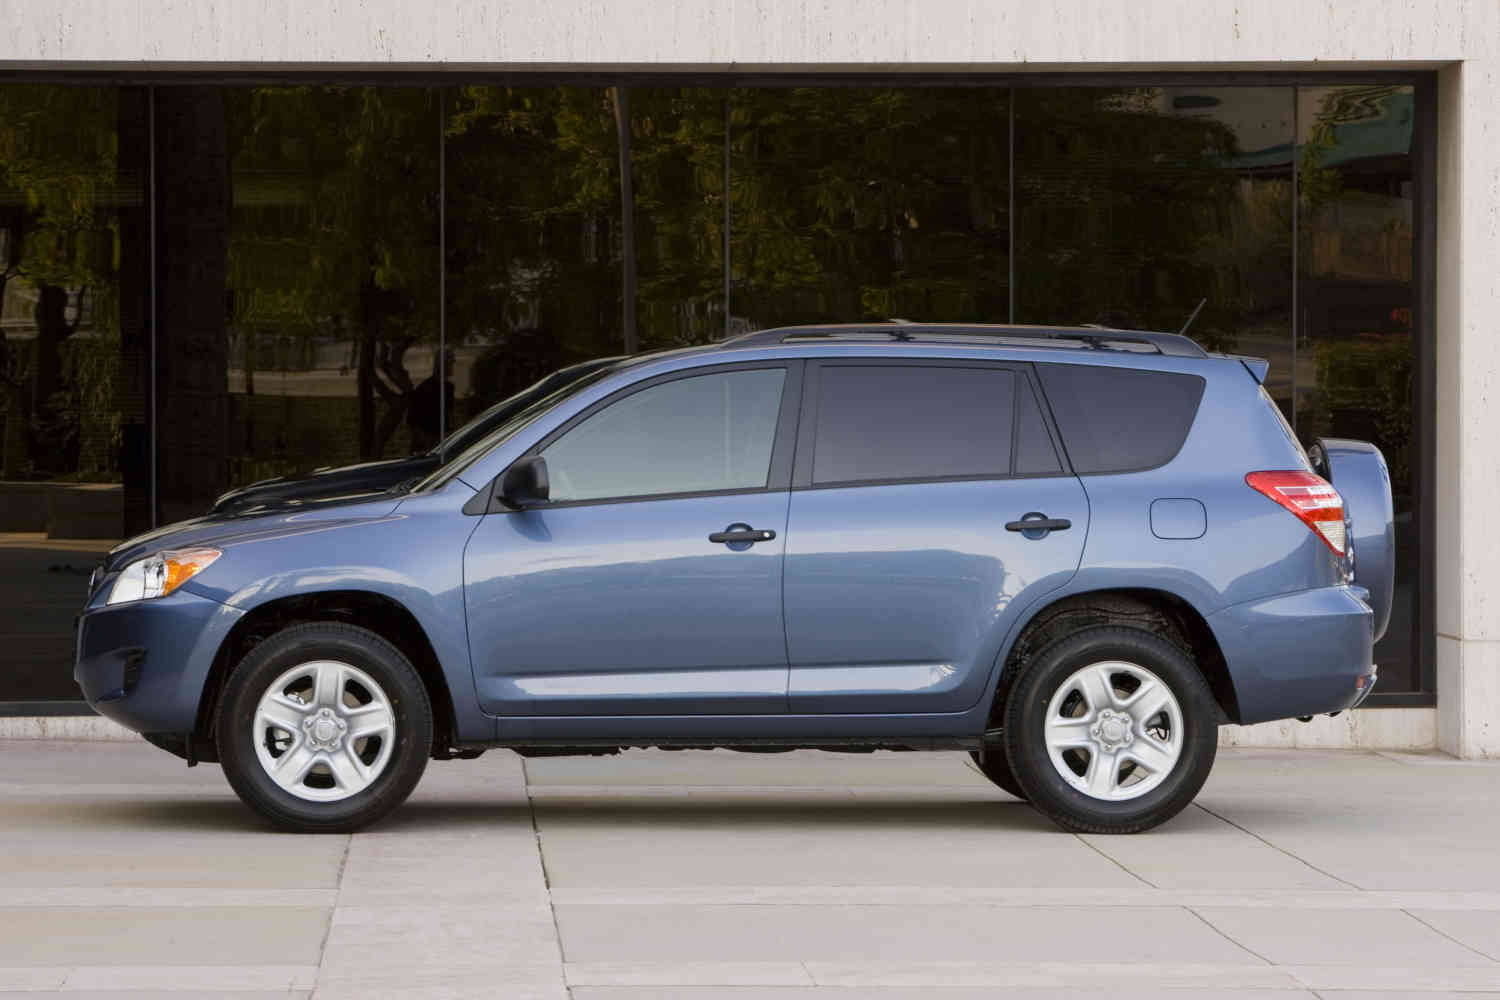 The 2009 Toyota RAV4 is one of the best used SUVs for teen drivers